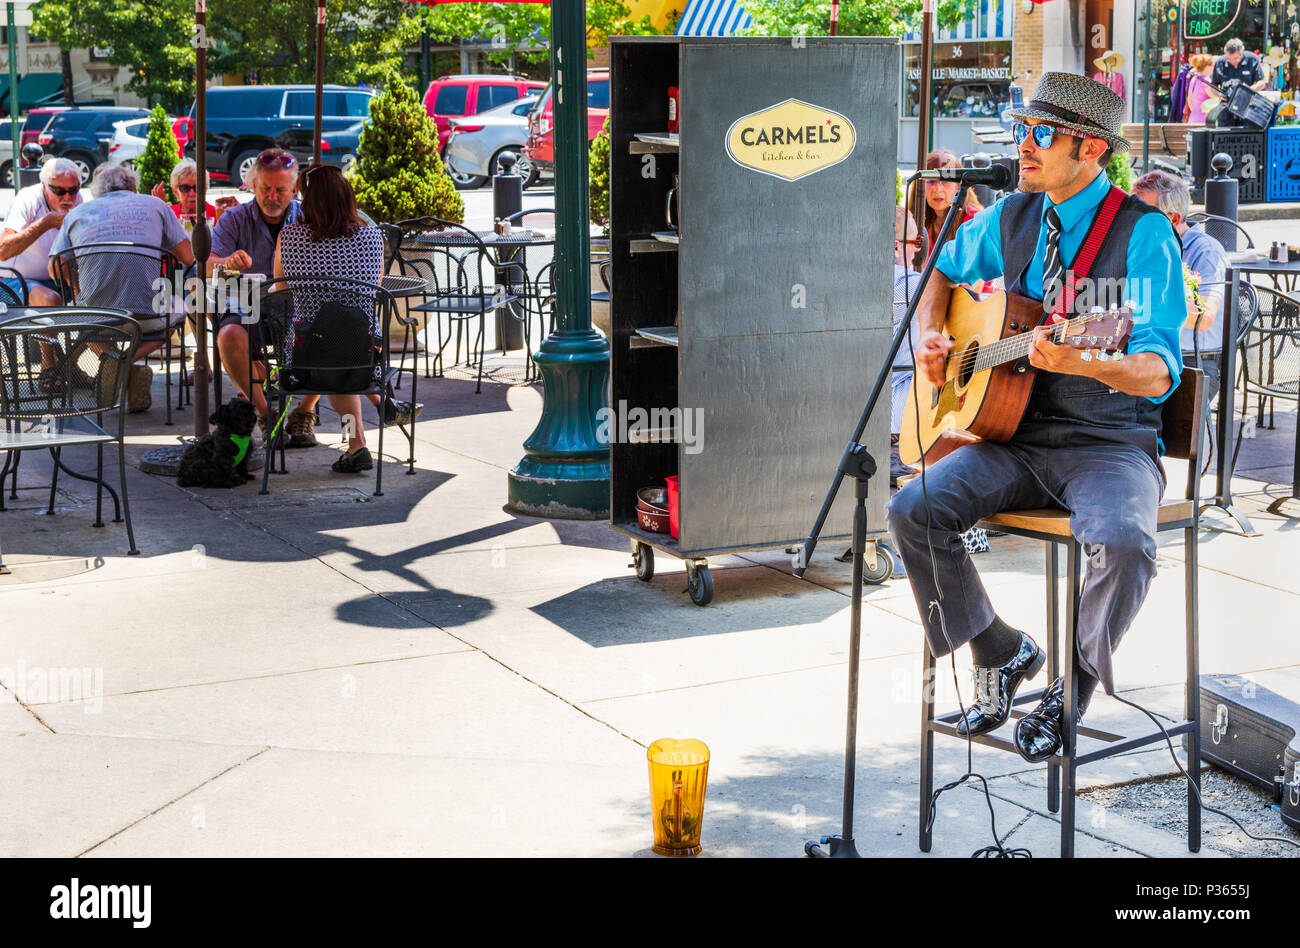 Asheville Nc Usa 10 June 18 A Street Performer Sings And Plays Guitar While Patrons Dine Outside At Carmel S Kitchen And Bar Stock Photo Alamy